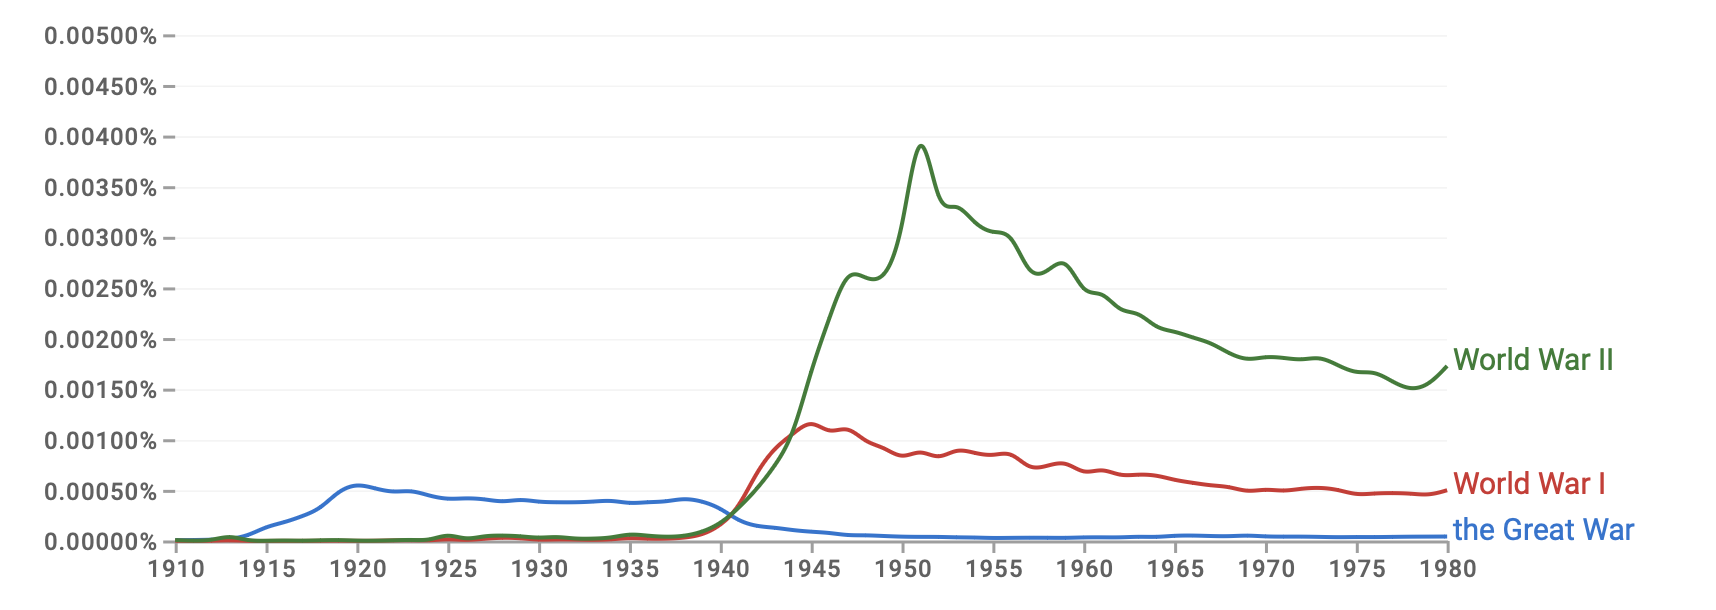 ngram example